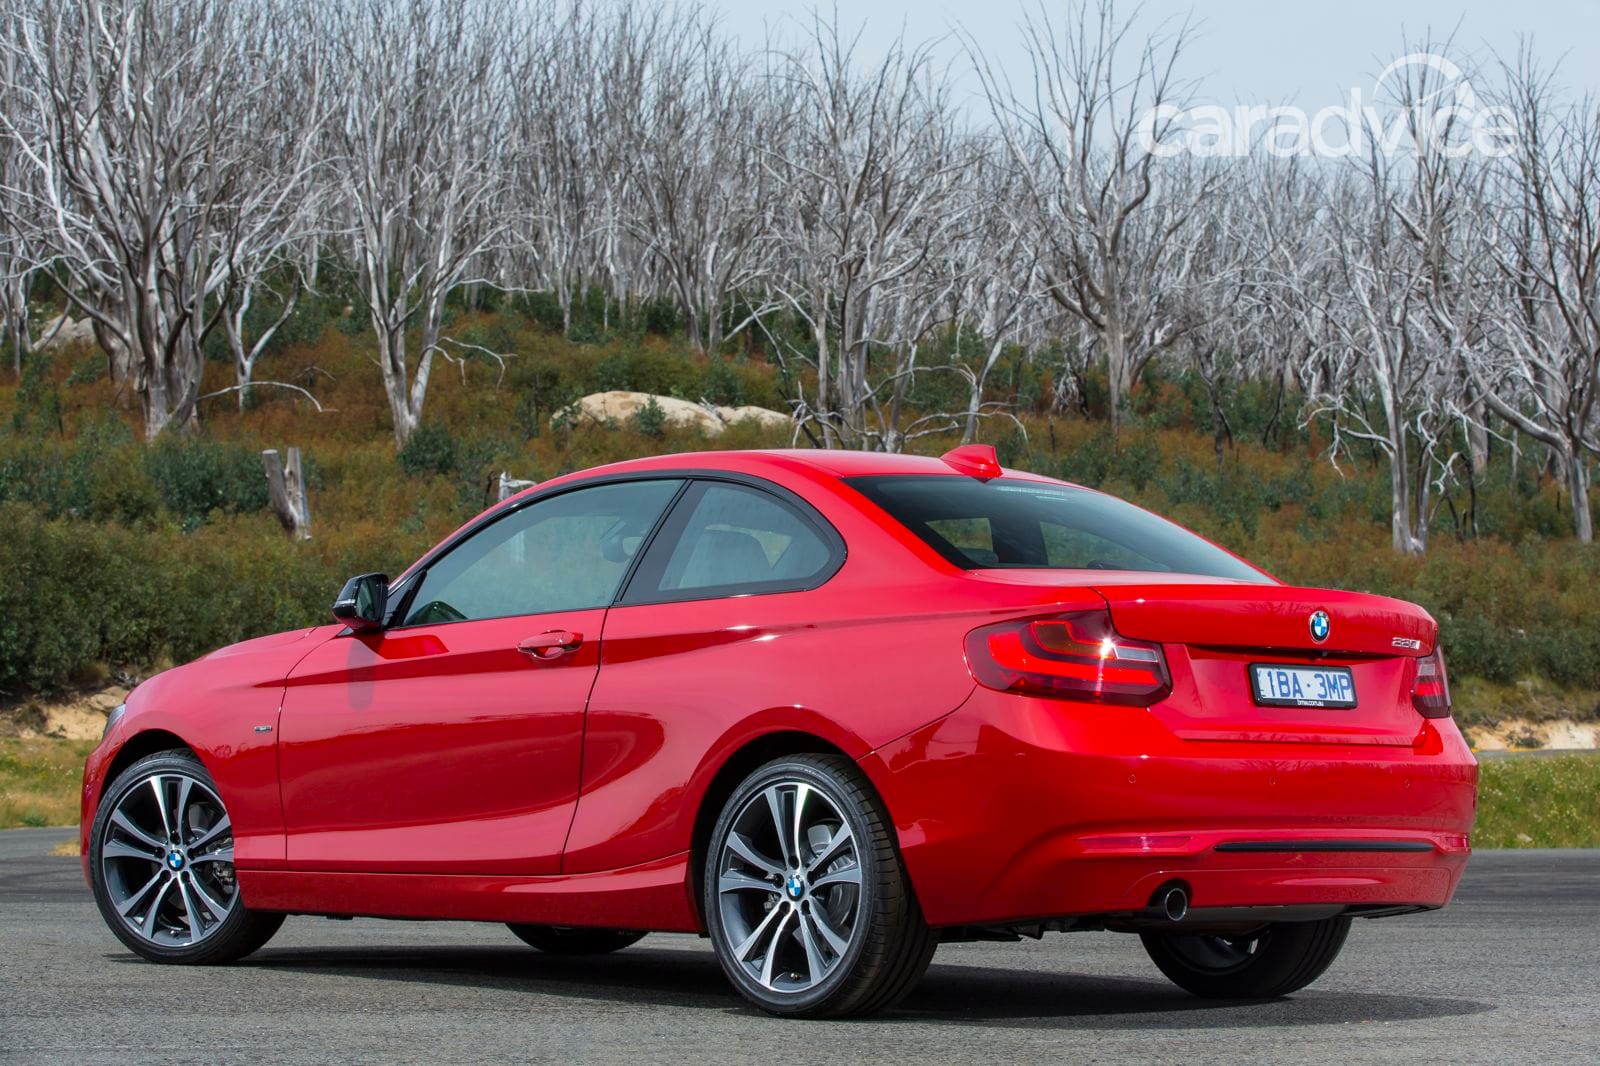 BMW 2 Series Pricing and specifications CarAdvice